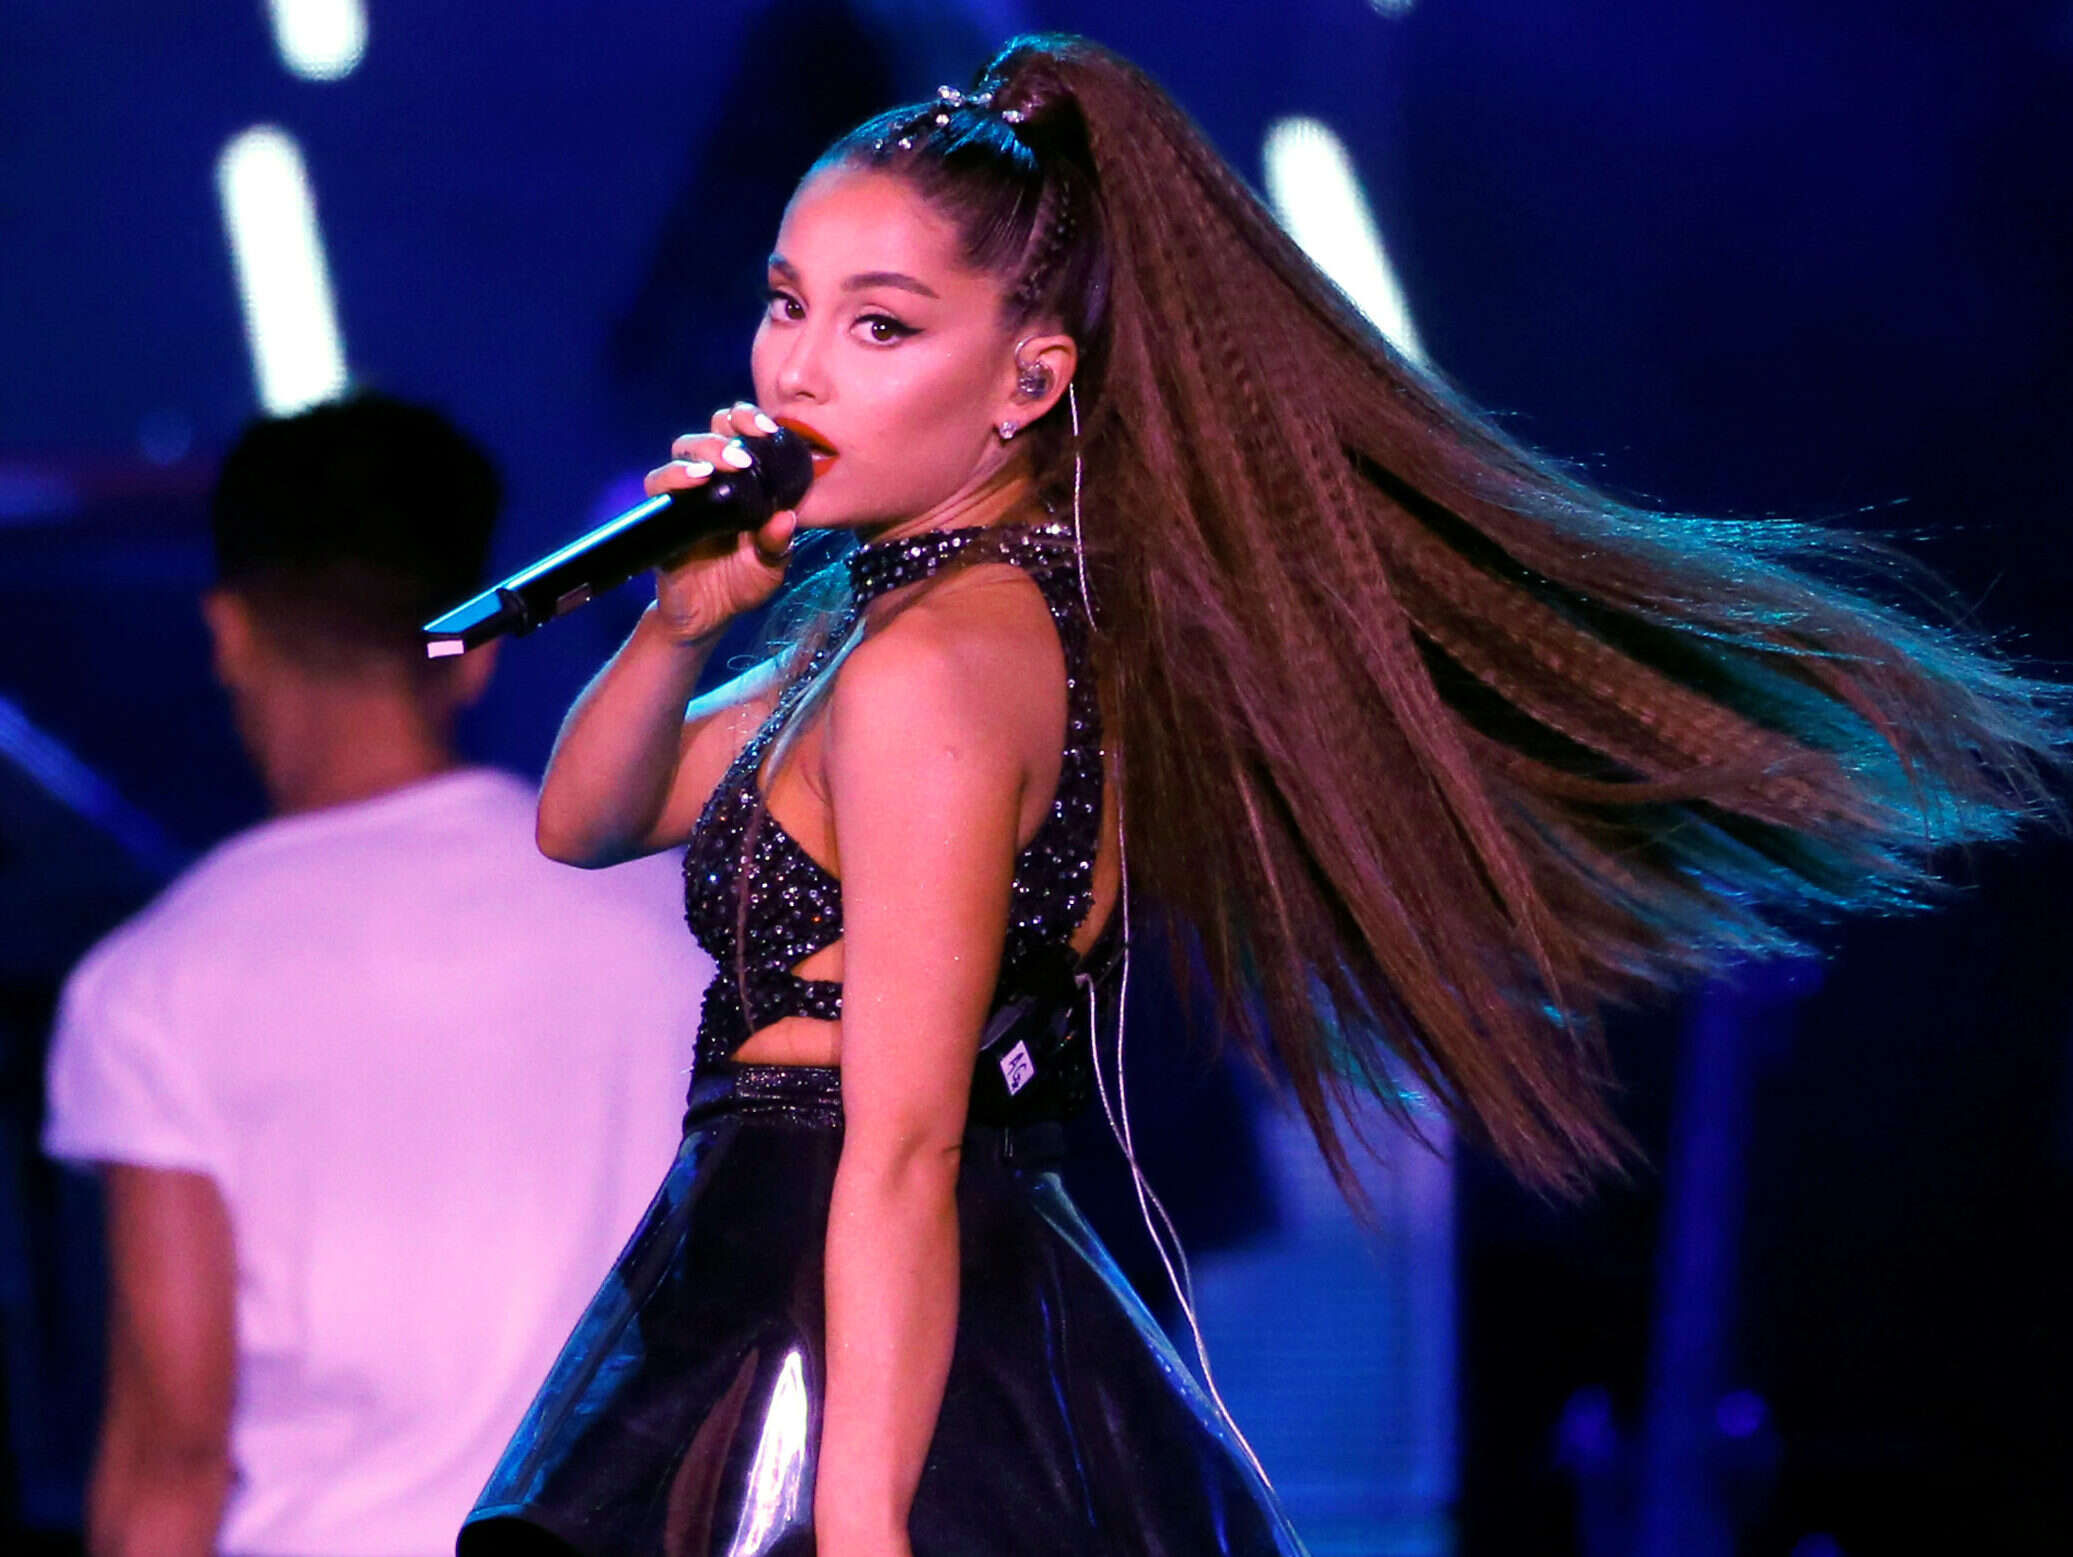 Photographers warned Ariana Grande Pride concert contract breaches ...